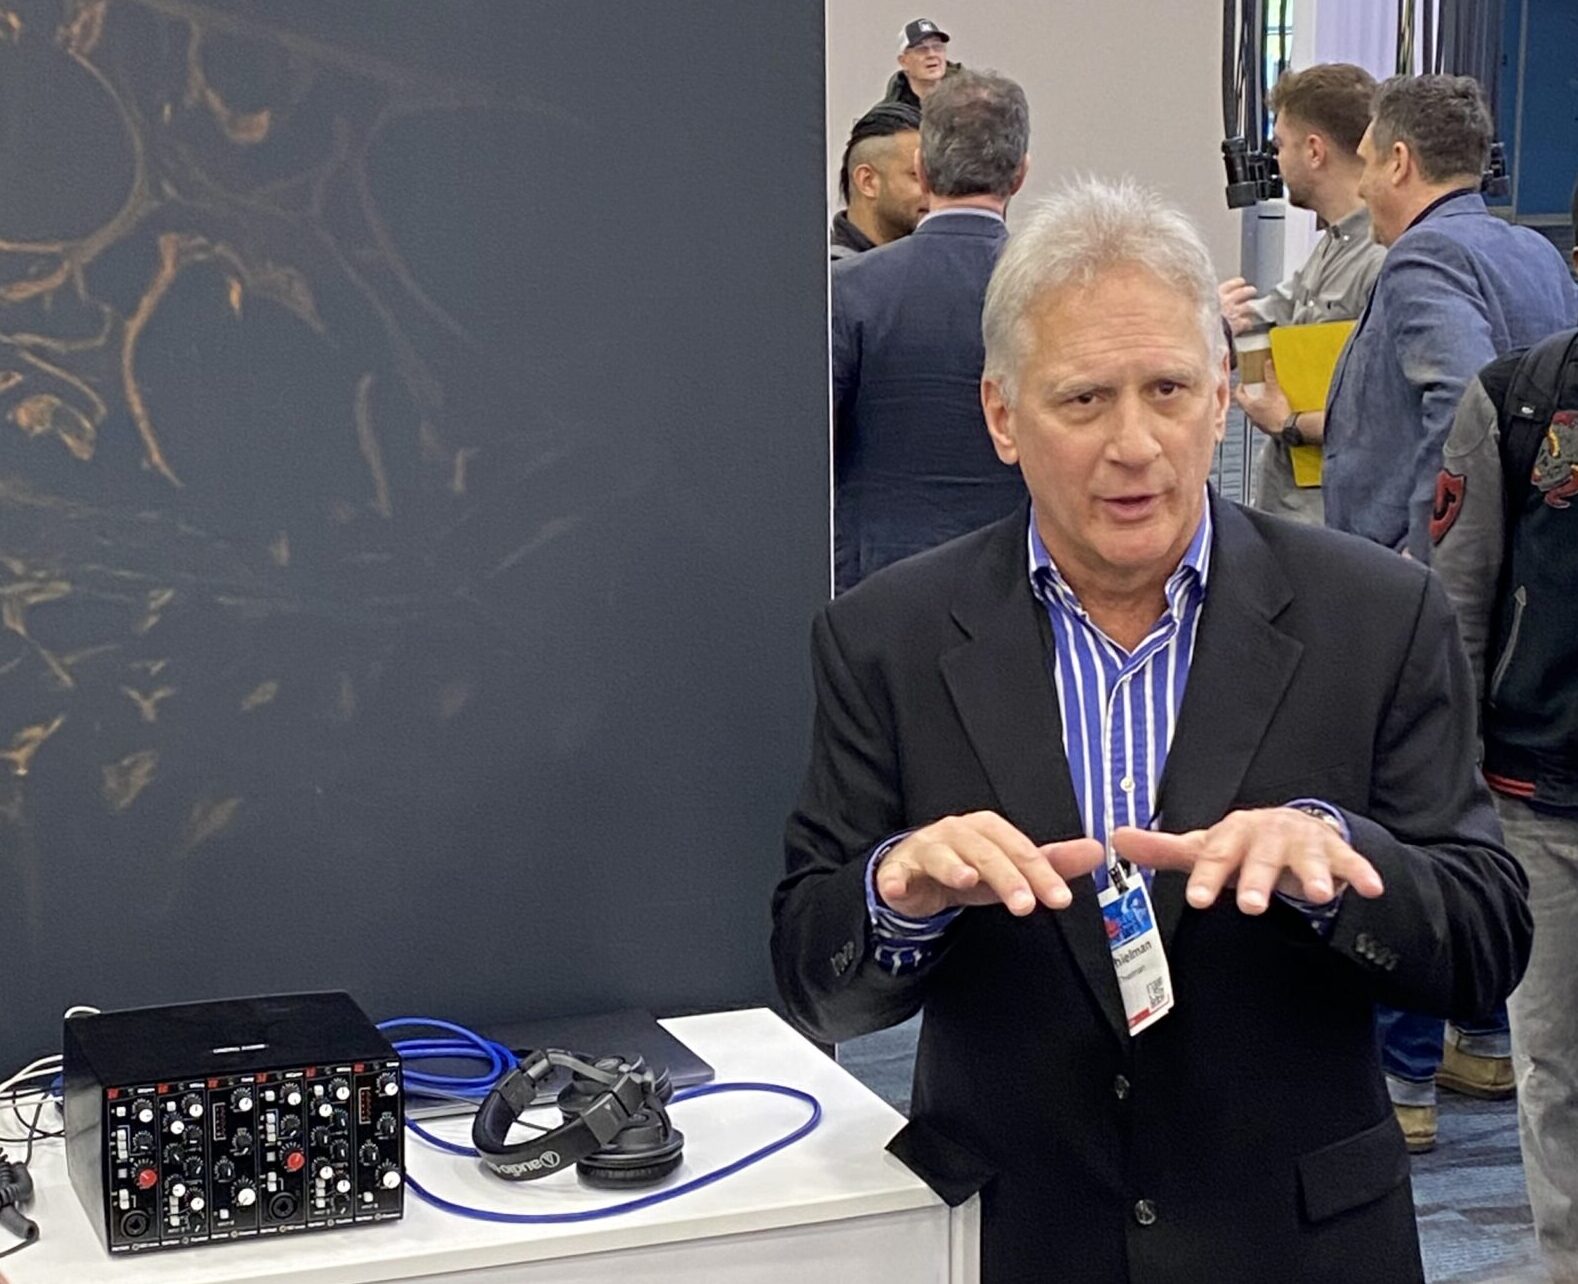 Gary Thielman, president of Harrison Audio, revealed three new 500 Series format units—the 2Cpre+ microphone preamplifier, the MR3eq 3-band parametric equalizer, and the Comp compressor.